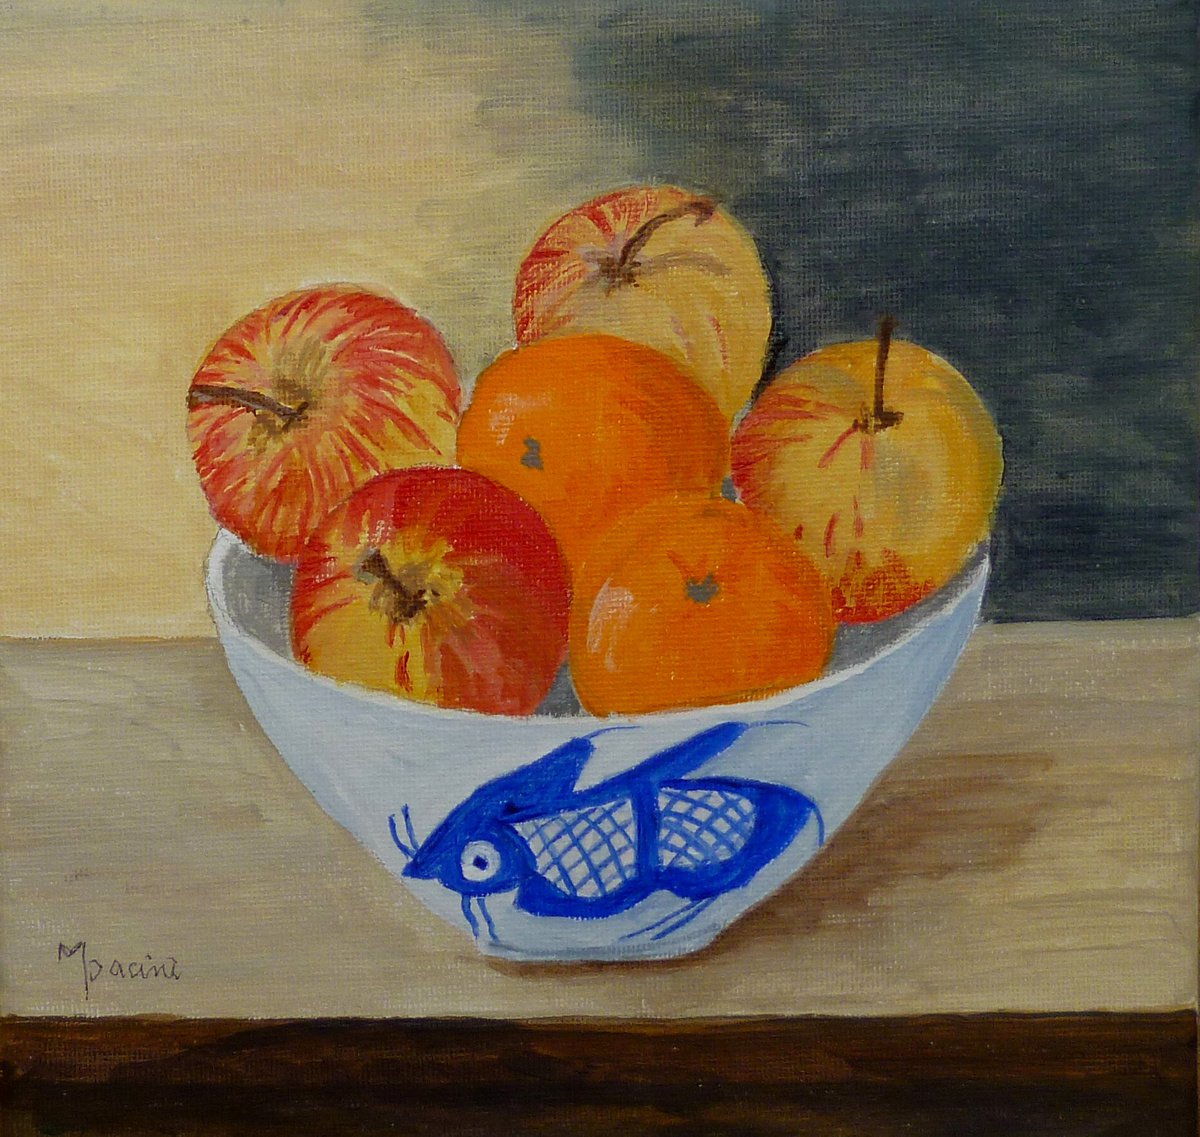 A Bowl of Fruit by Maddalena Pacini